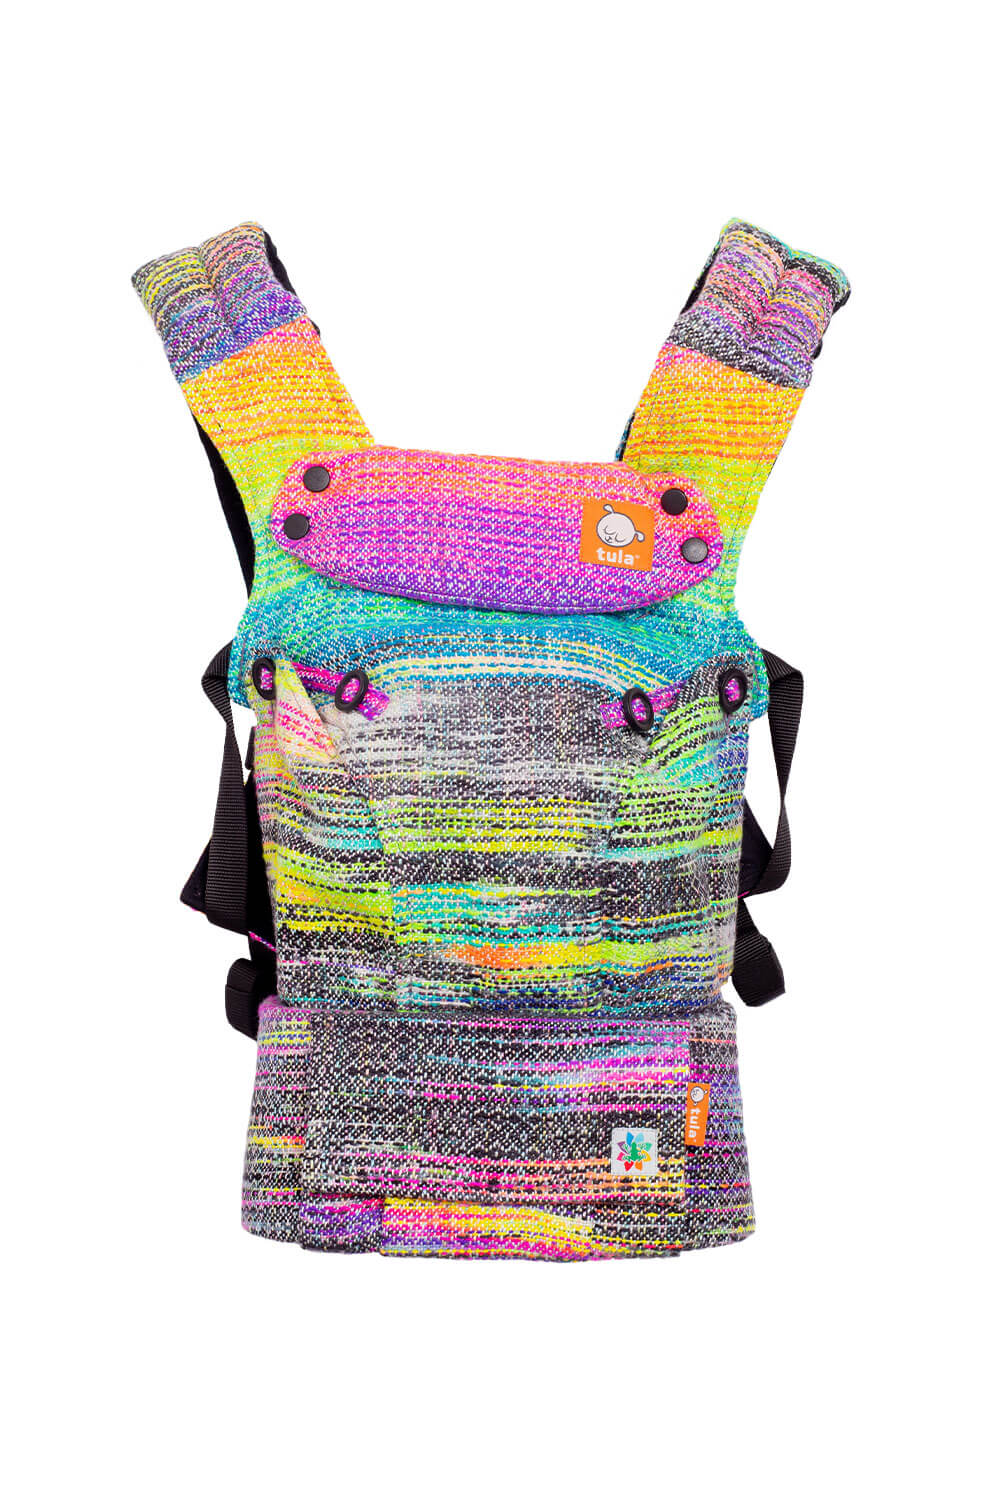 Rainbow Dynamite - Signature Handwoven Explore Baby Carrier